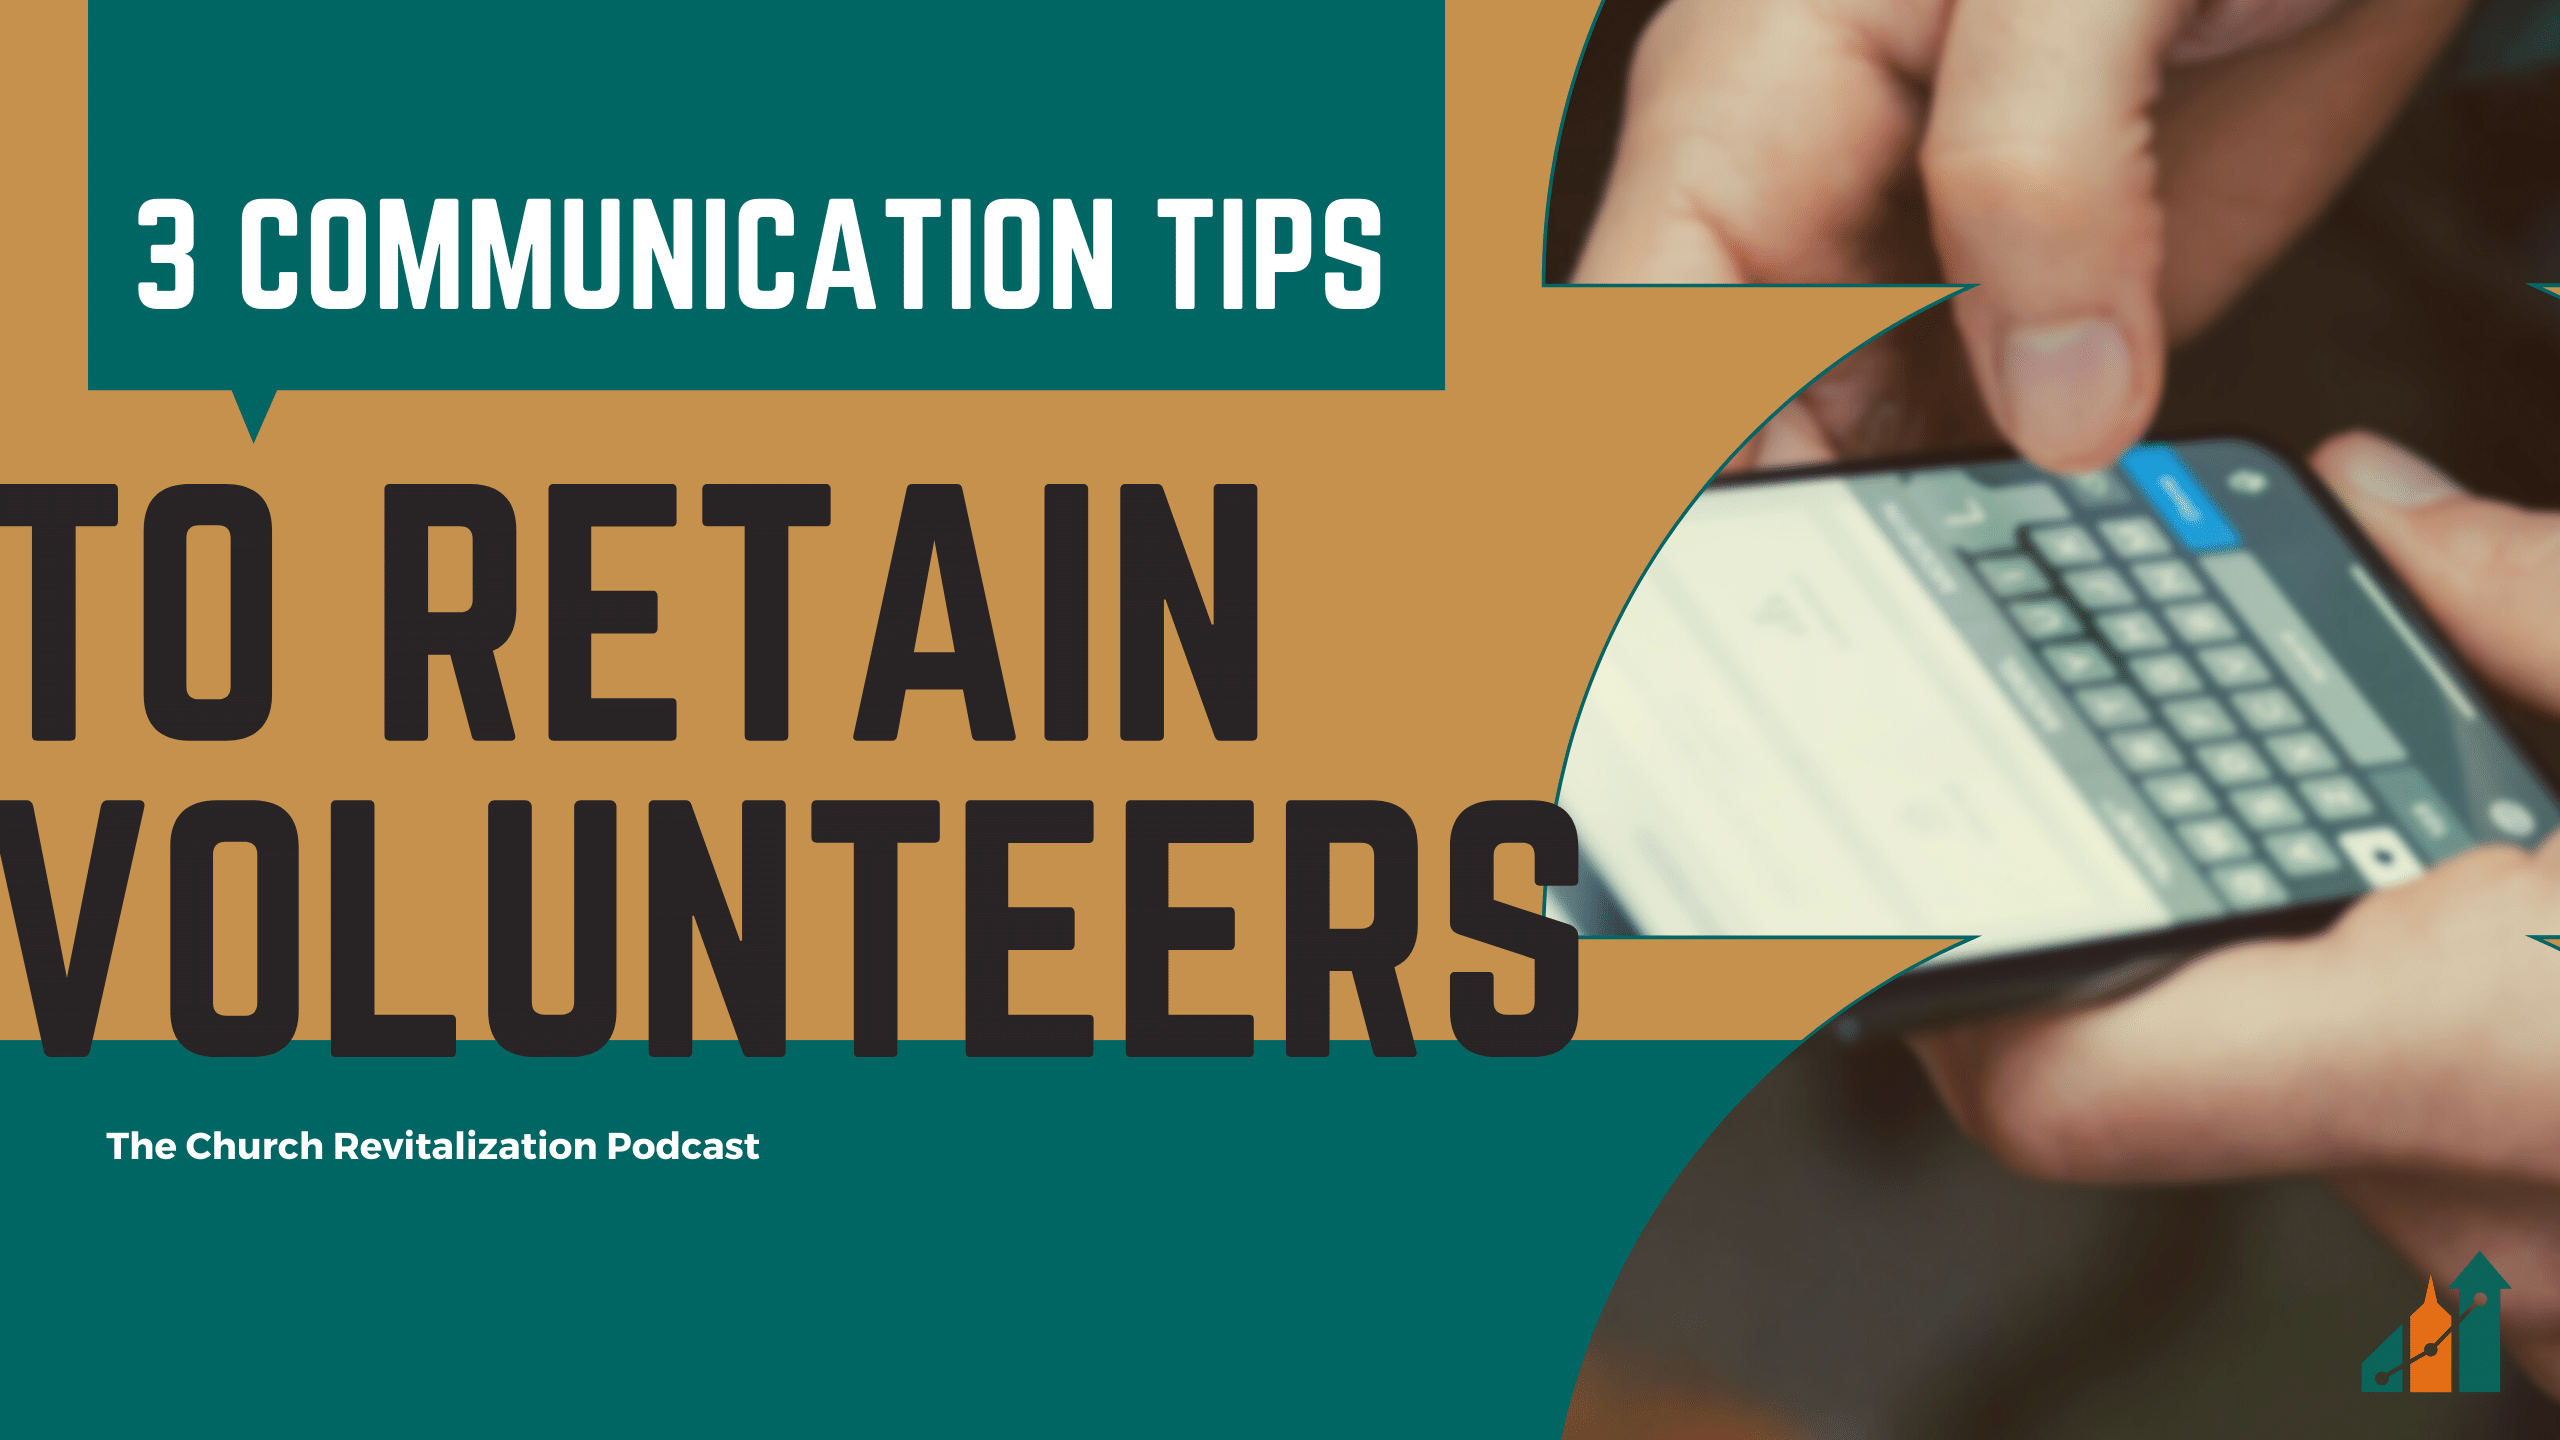 3-communication-tips-to-retain-volunteers_the-church-revitalization-podcast_the-malphurs-group